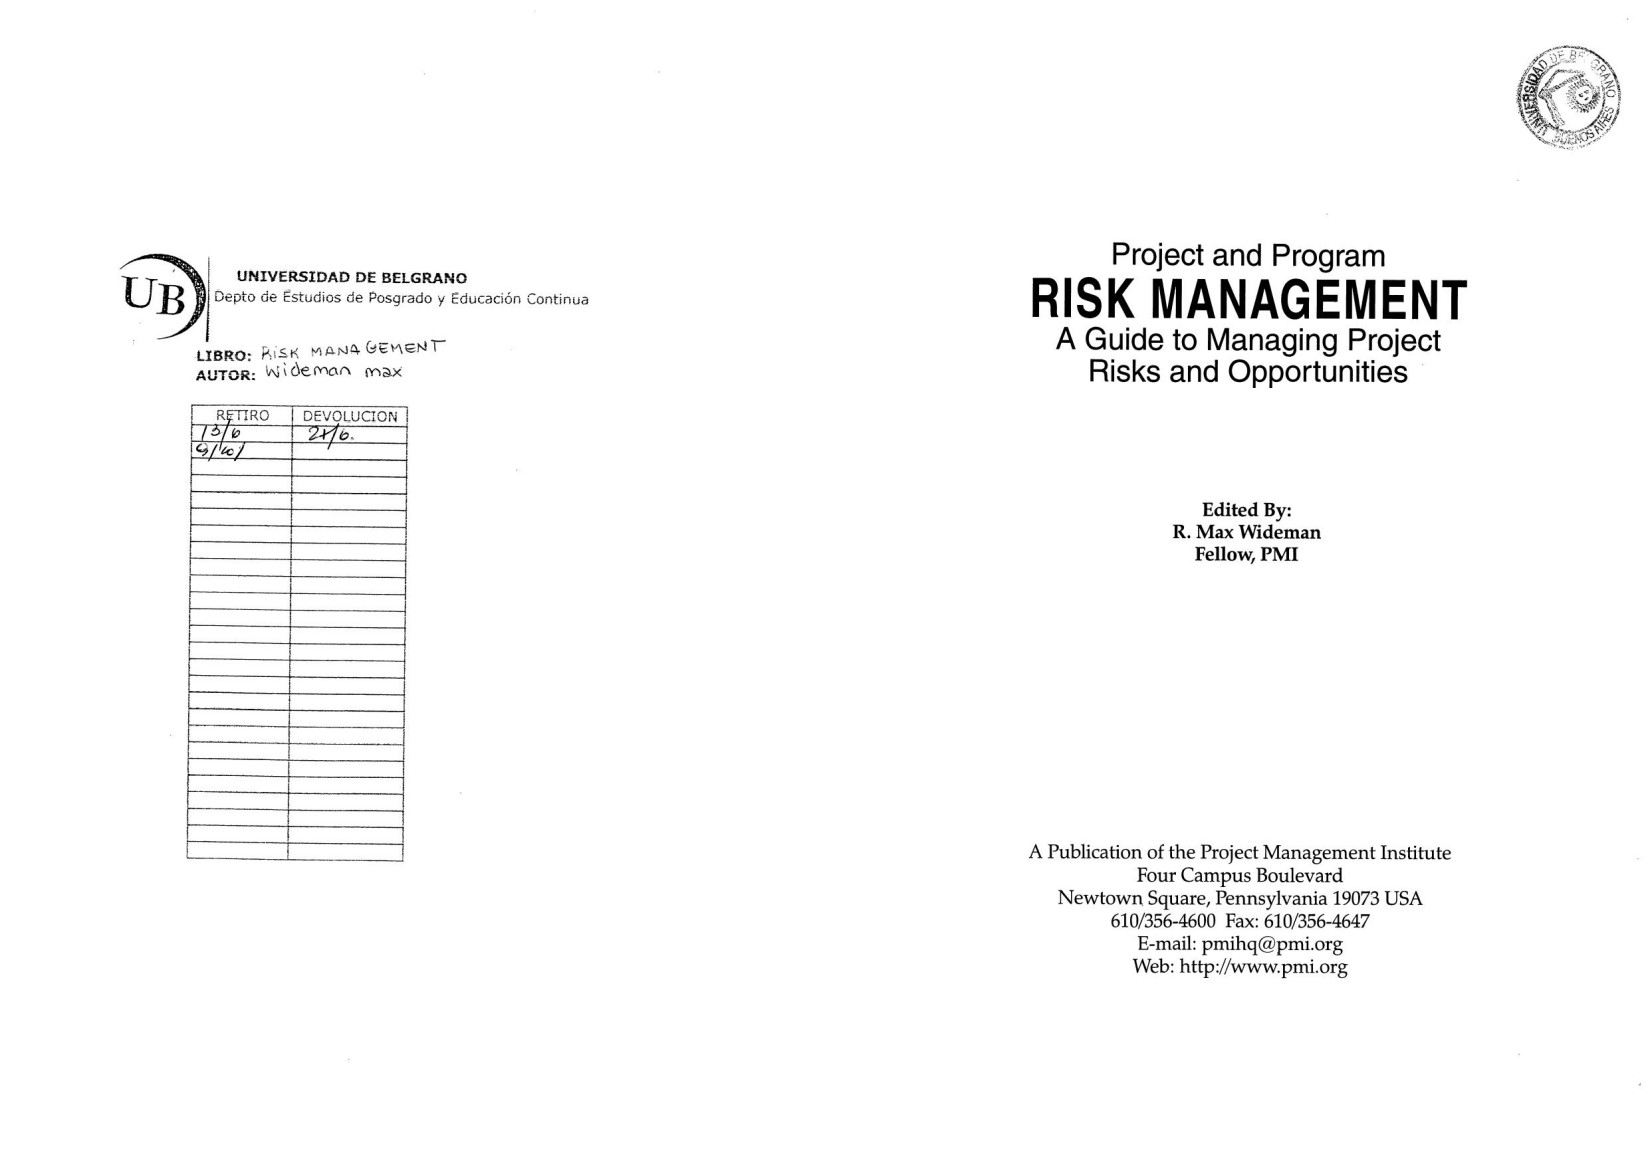 Project and Program Risk Management A Guide to Managing Project Risks and Opportunities (PMBOK Handbooks)